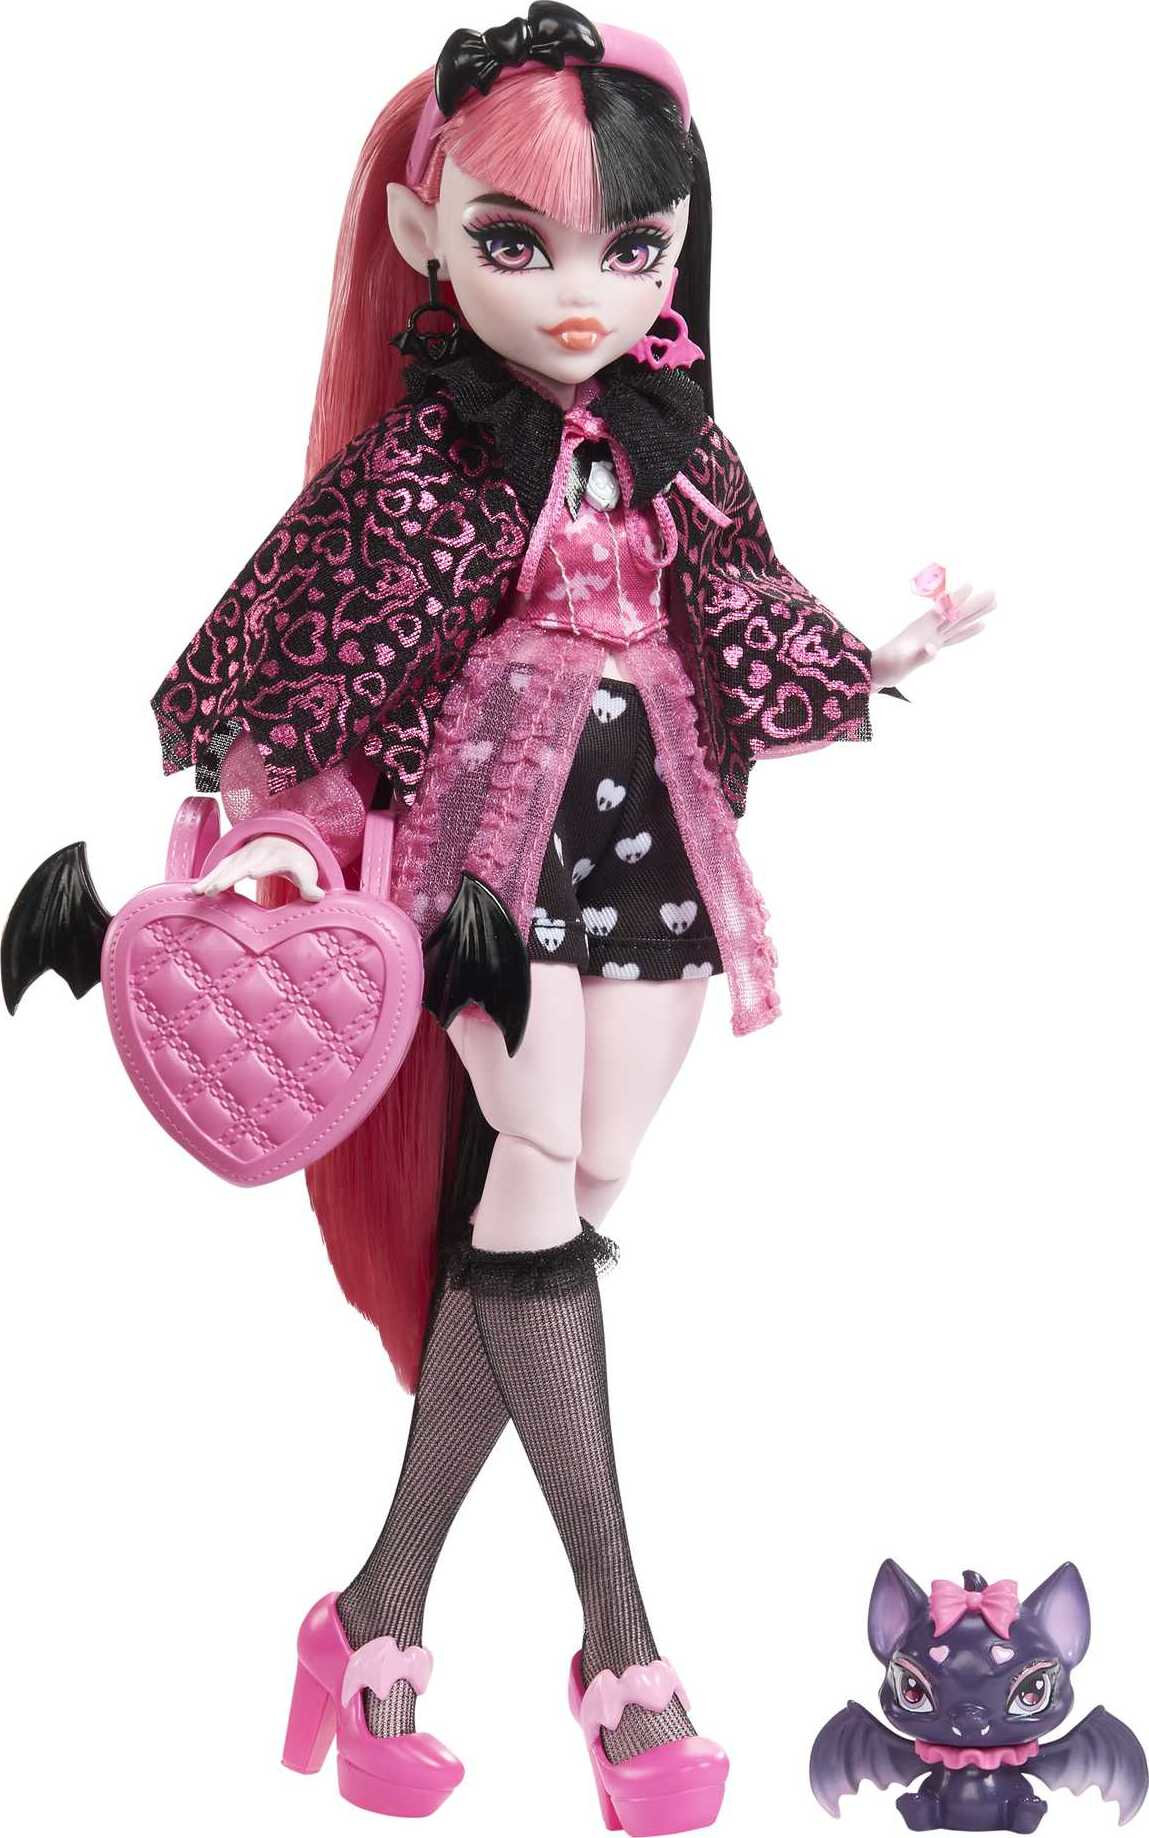 Monster High Draculaura Fashion Doll with Pink & Black Hair, Accessories & Pet Bat - image 1 of 7